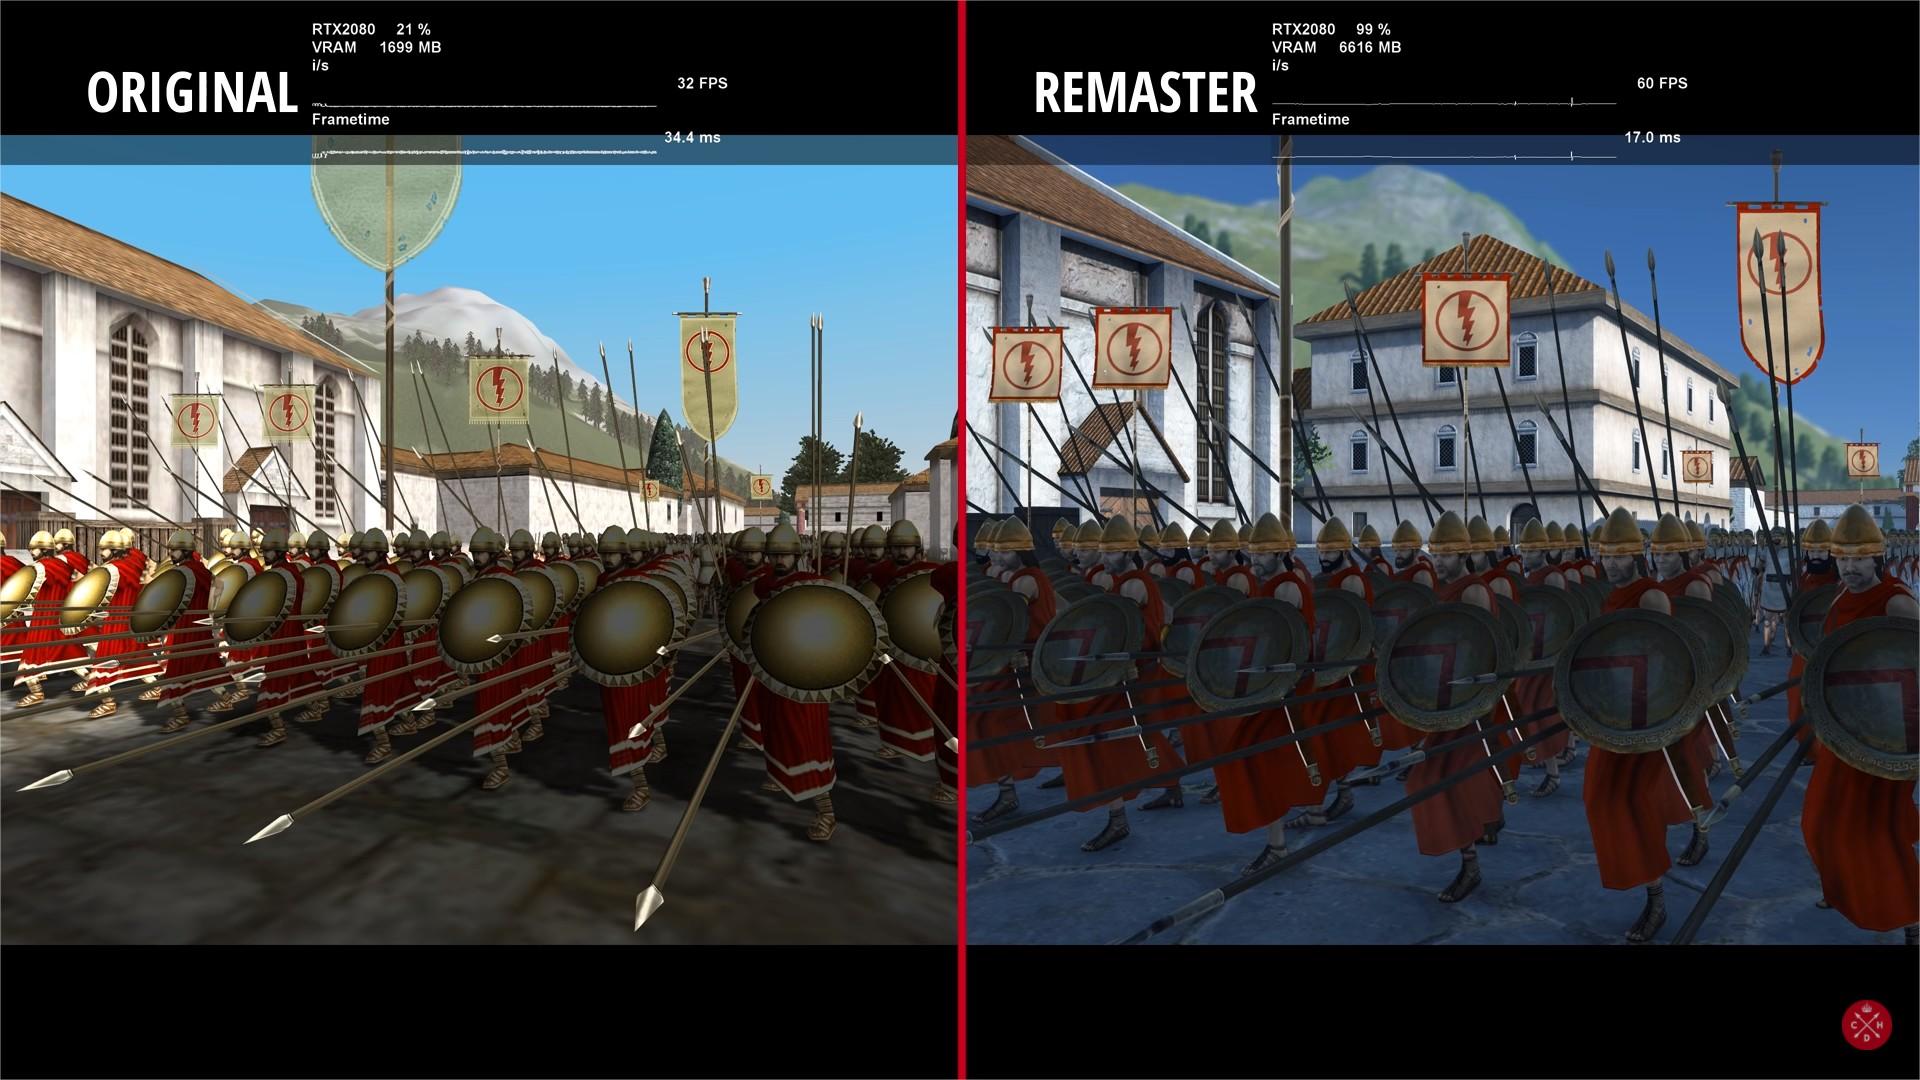 total war rome remastered pc